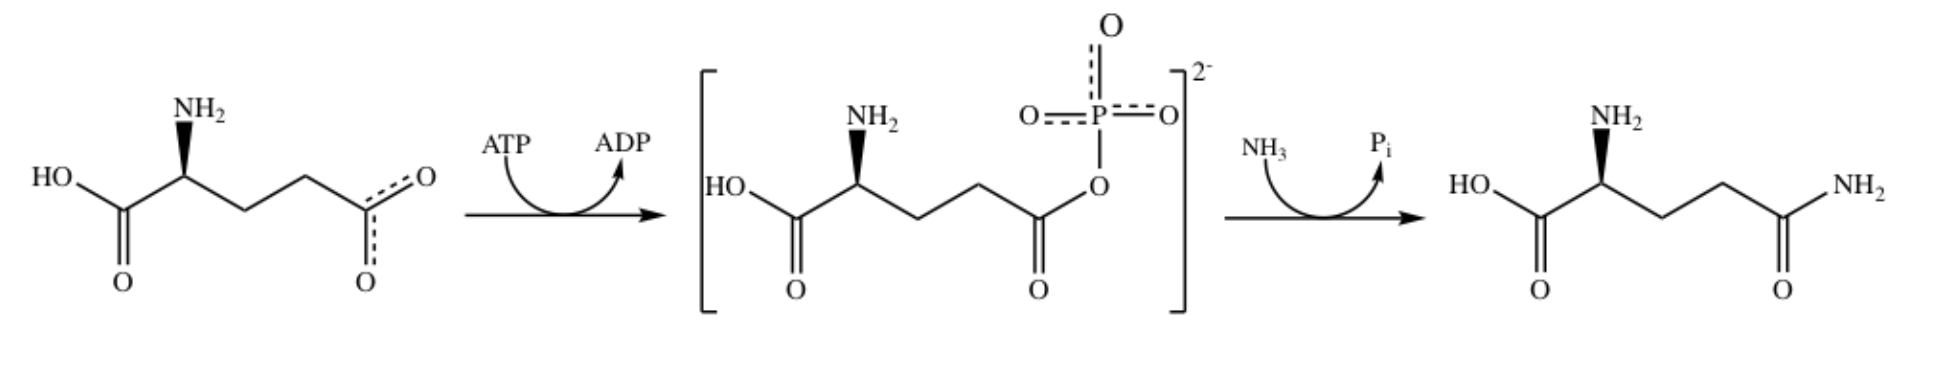 Proposed two step mechanism for the synthesis of glutamate and ammonia to yield glutamine.